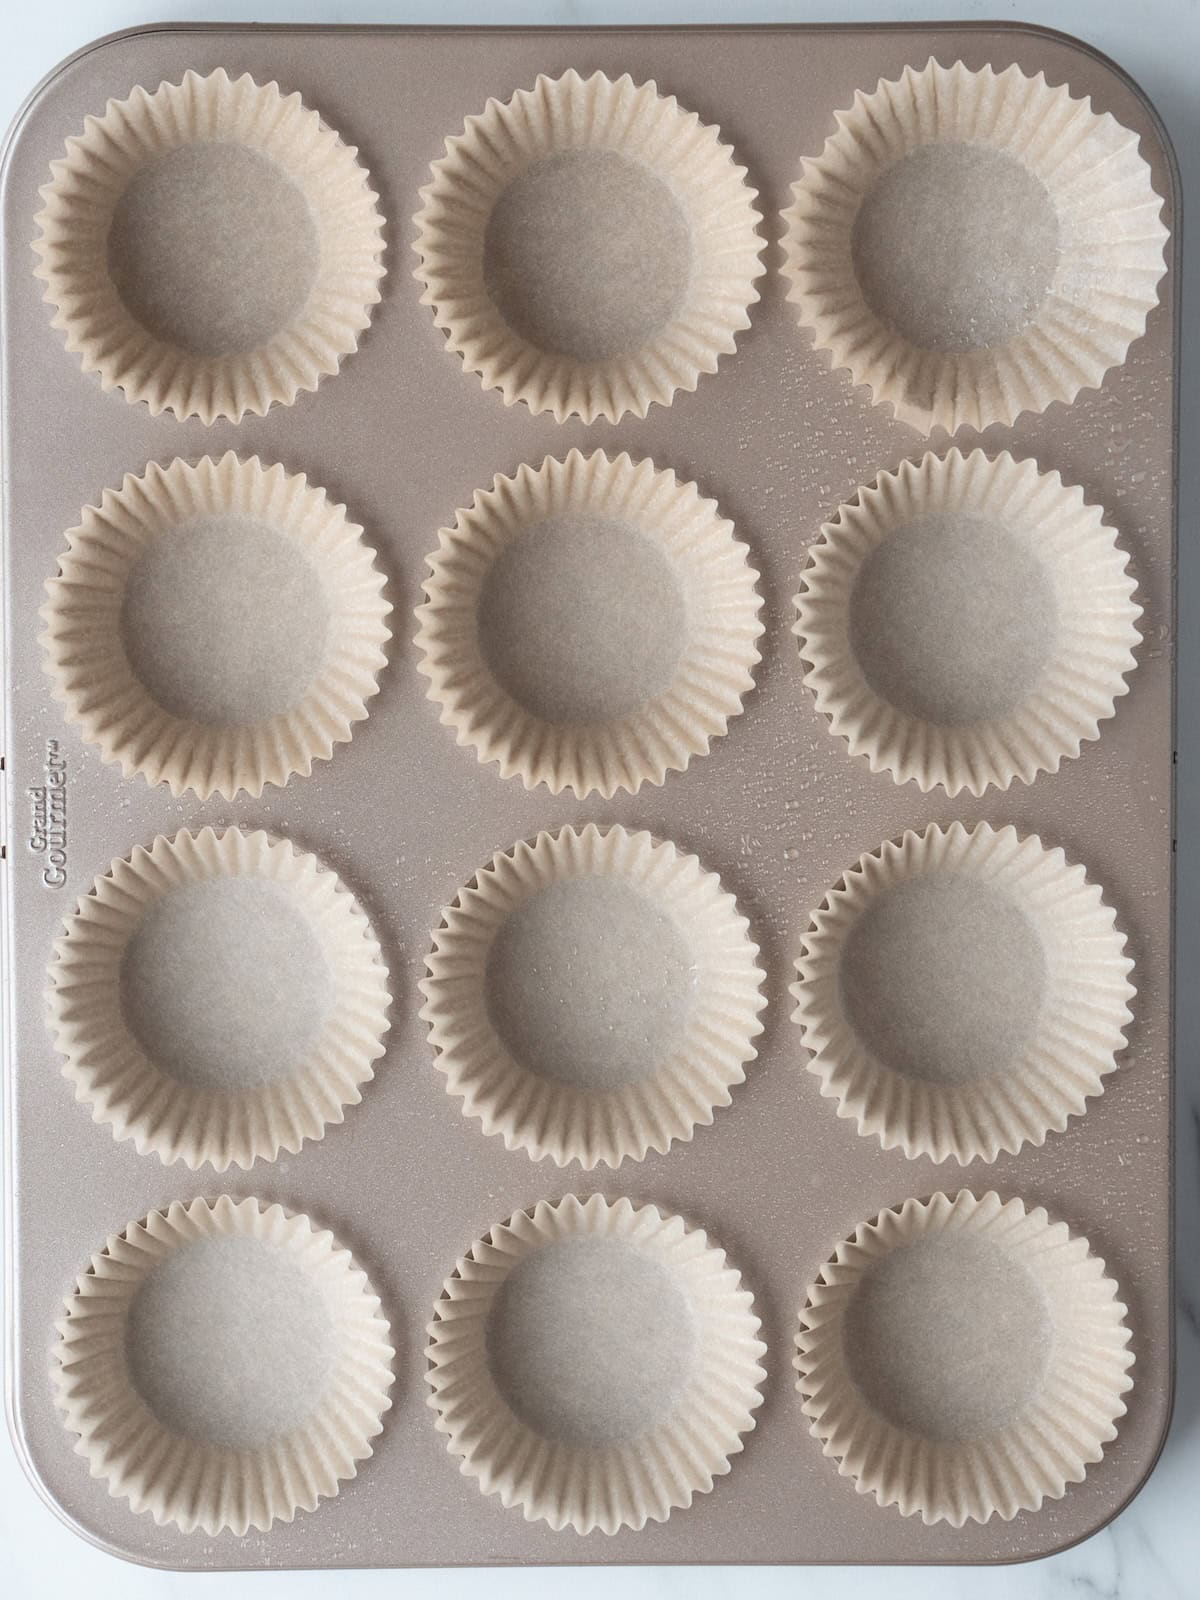 A 12 cupcake baking tray lined with cupcake liners and sprayed with non-stick baking spray.